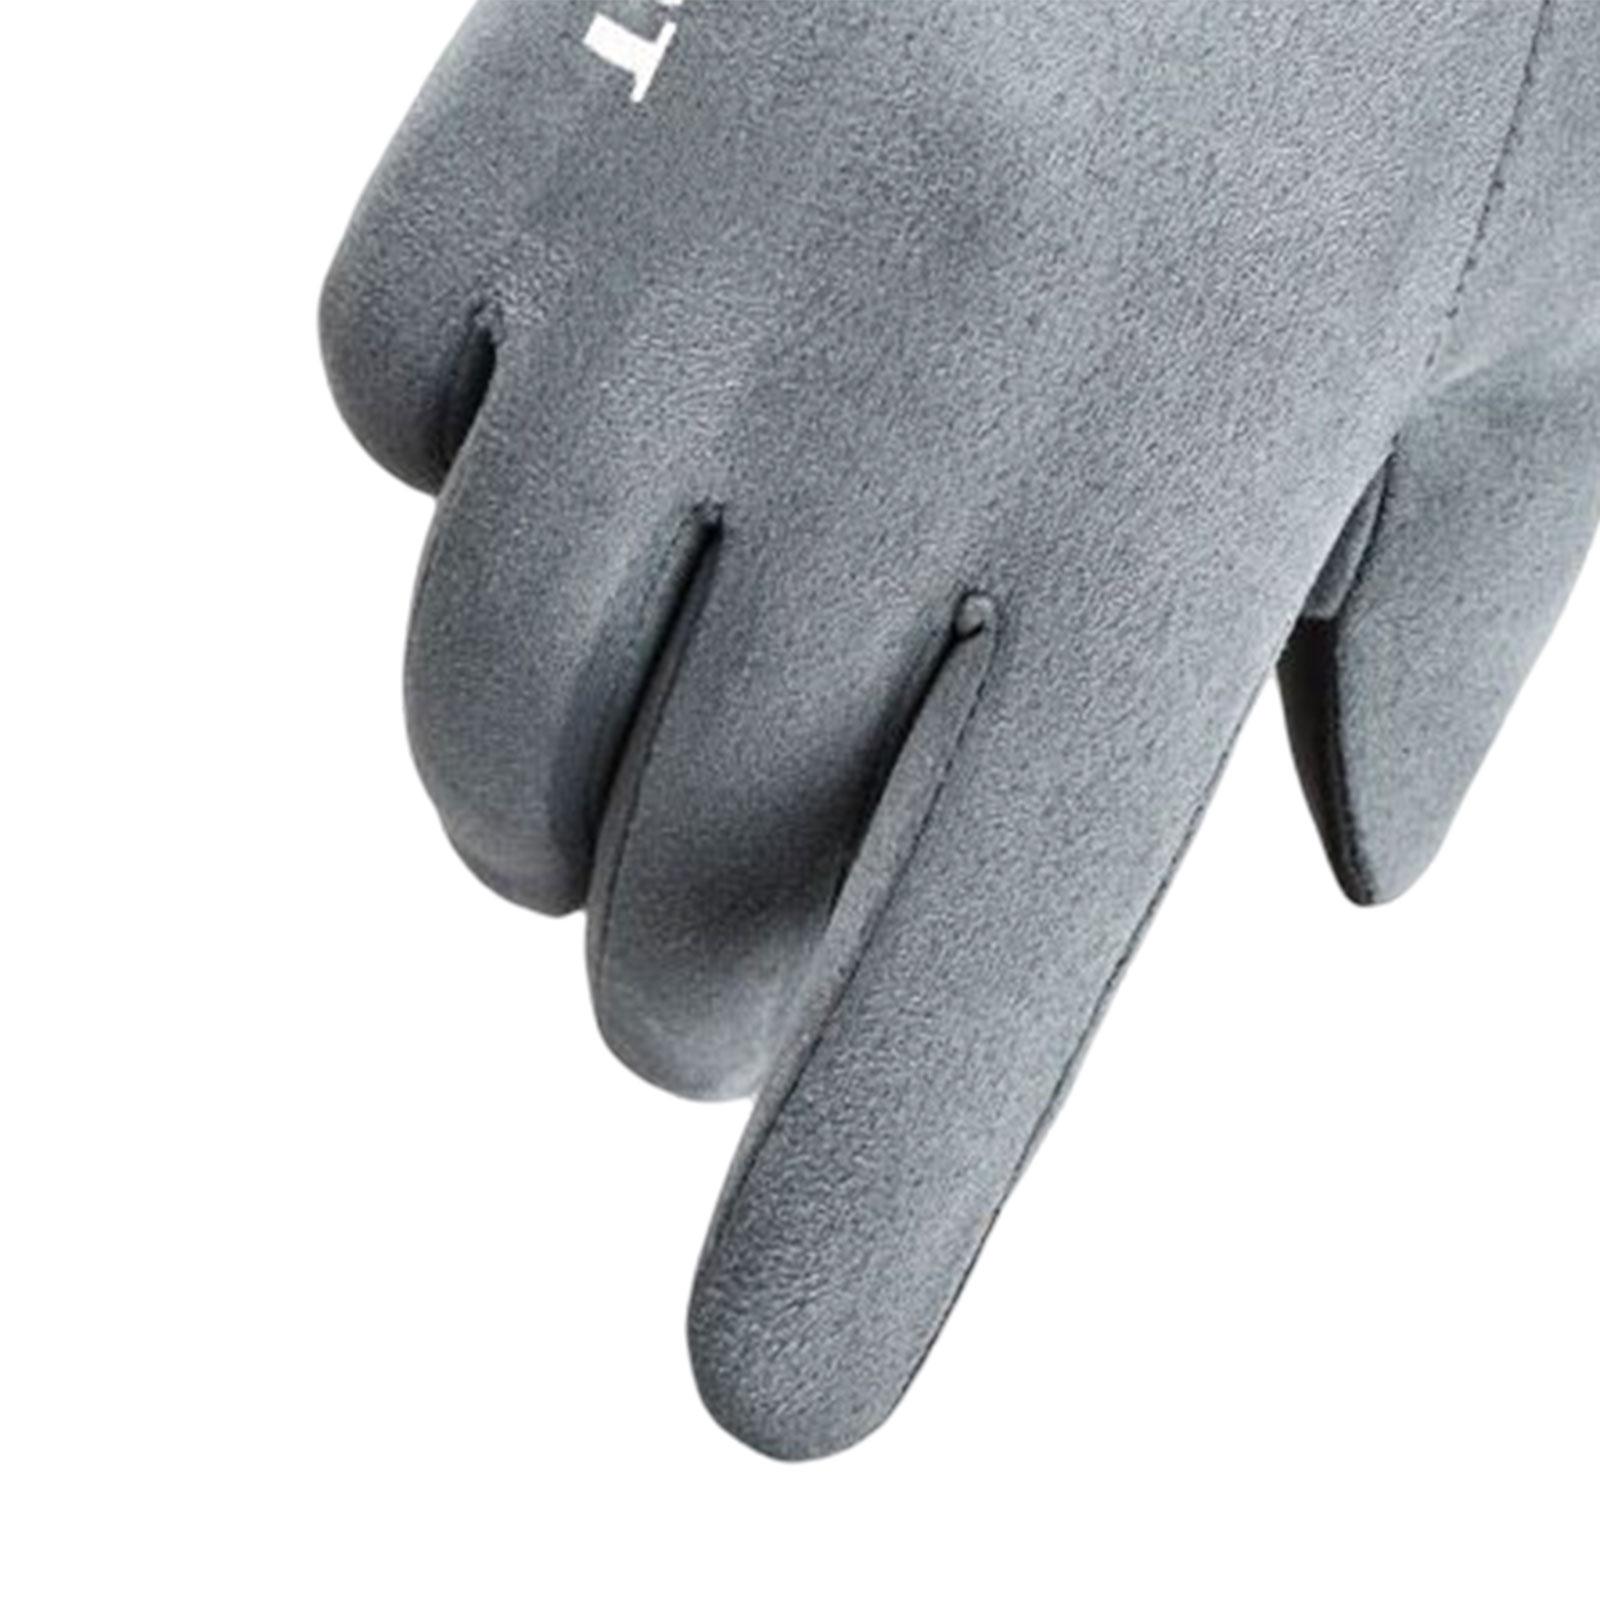 Winter Warm Sports Gloves Suede Anti Slip for Running Skating Cold Weather Women Blue Green